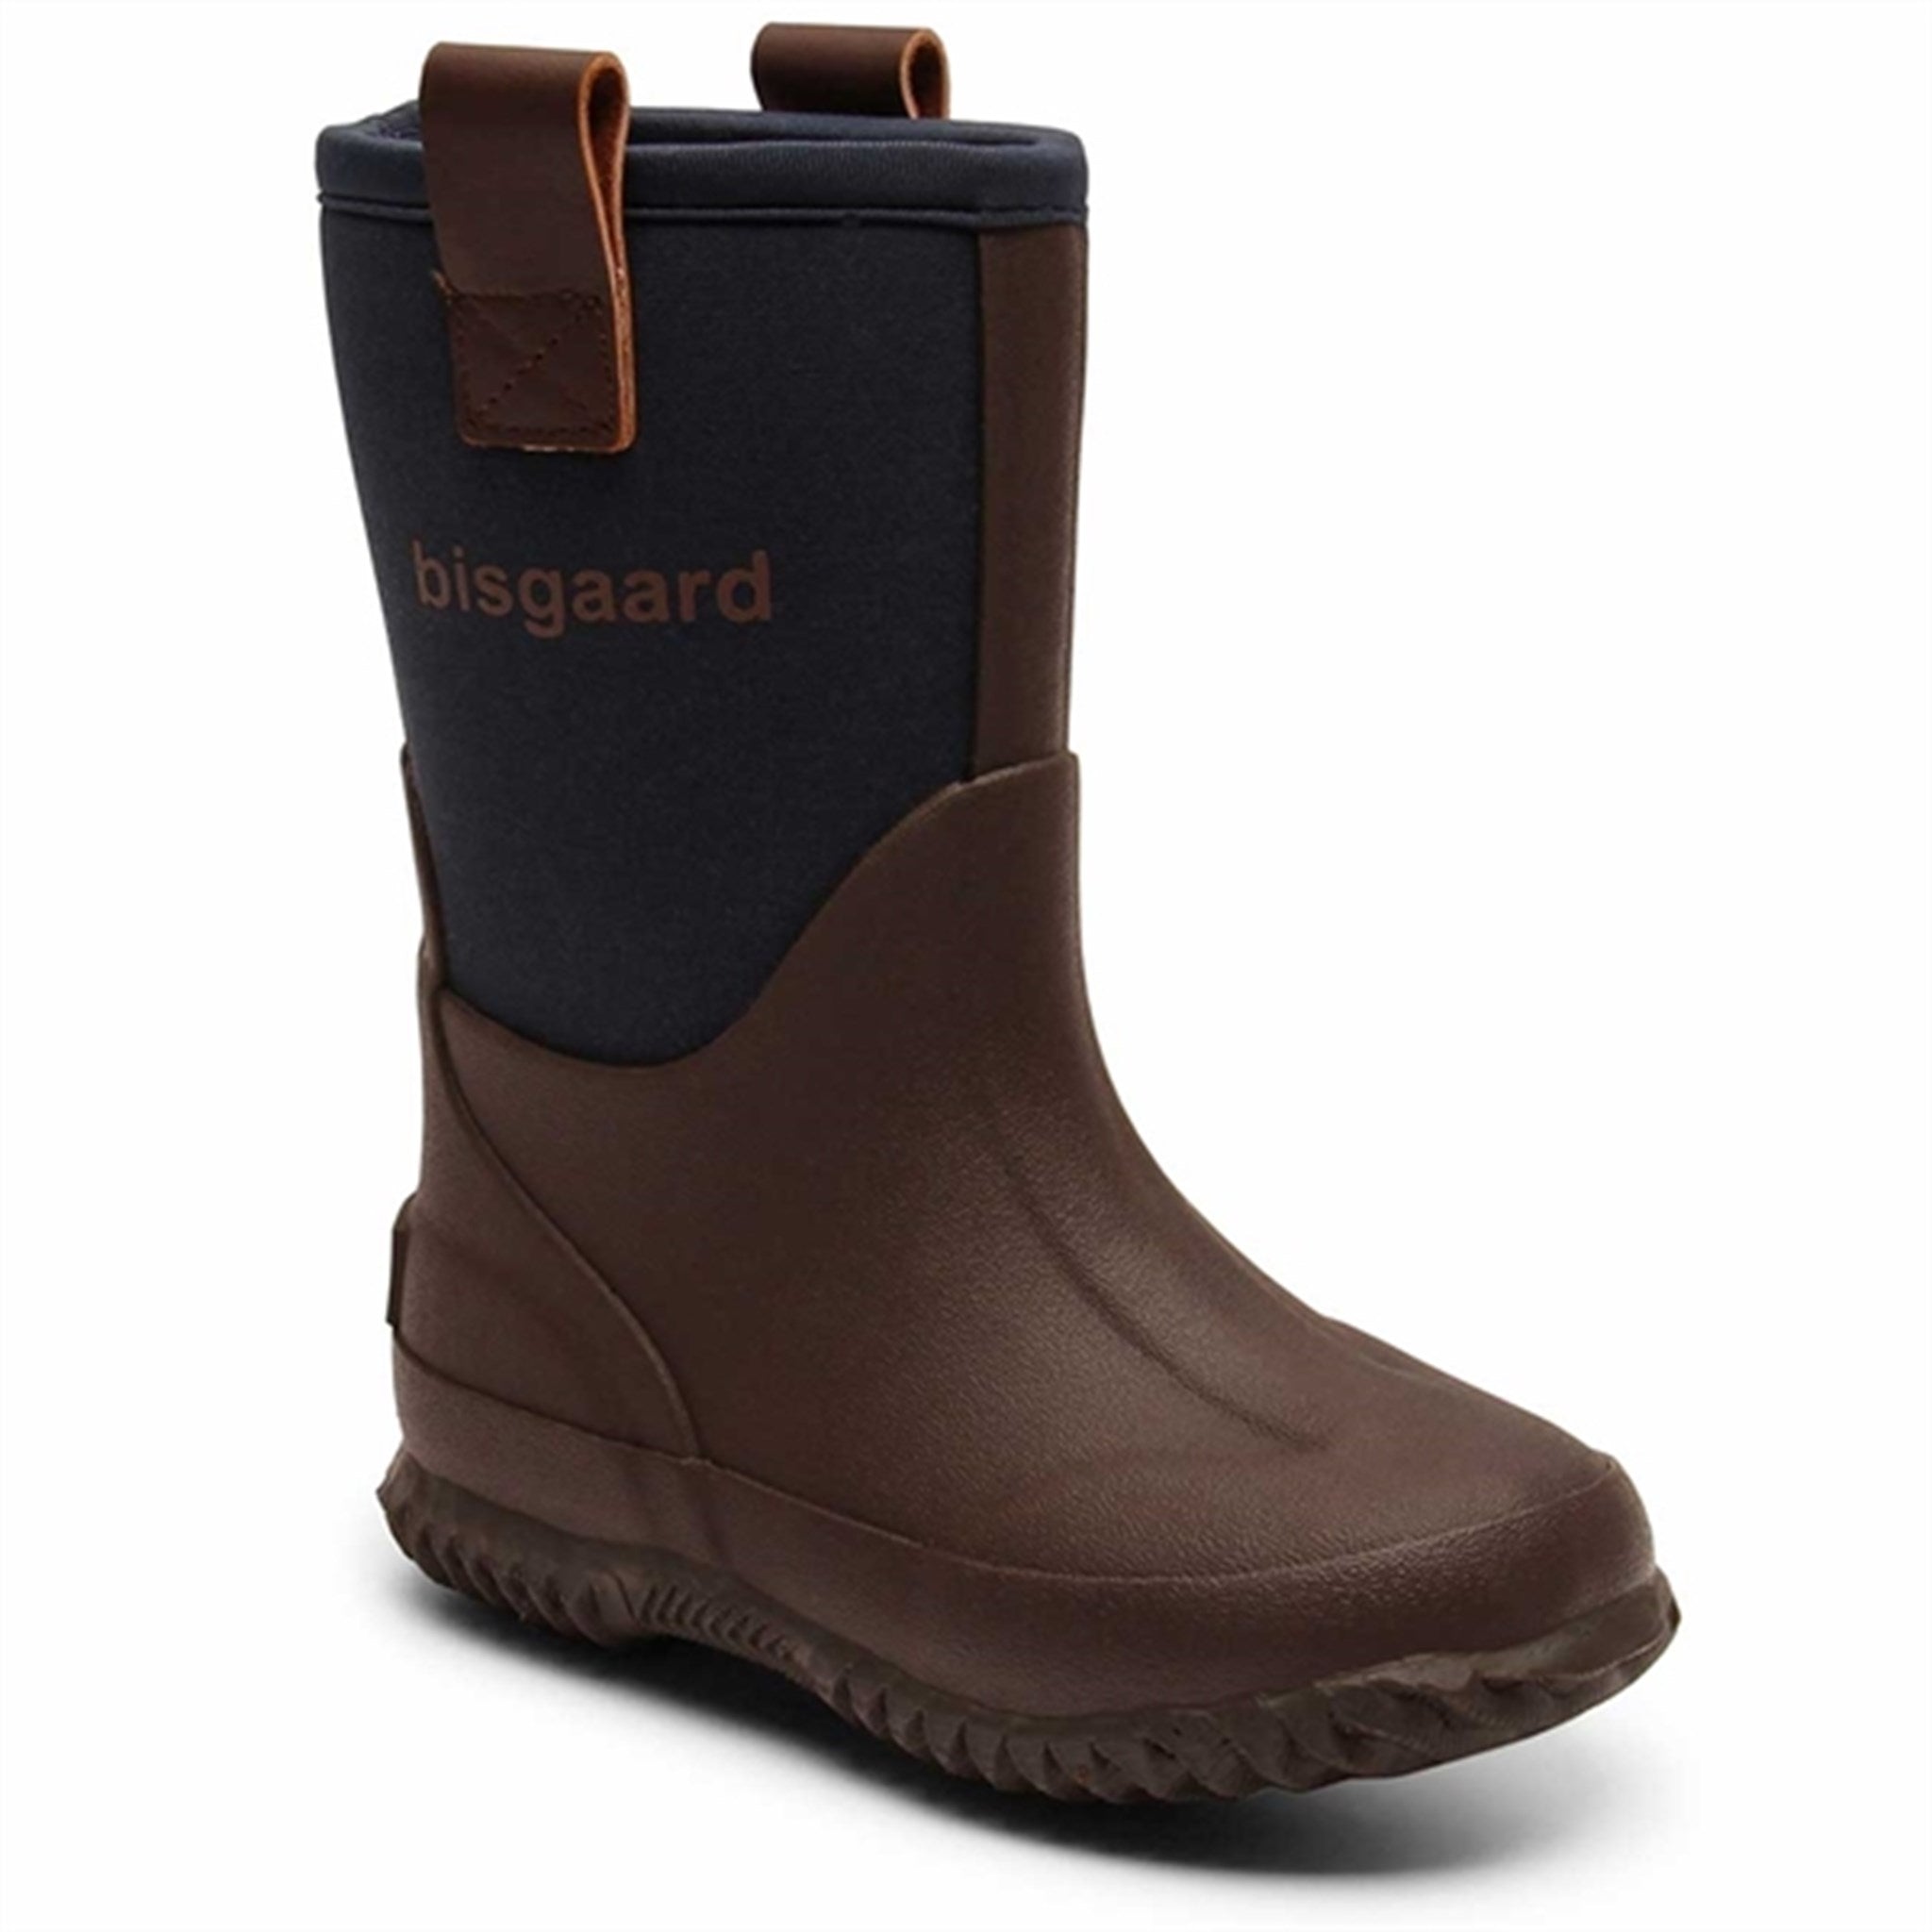 Bisgaard Neo Thermo Rubber Boots Navy